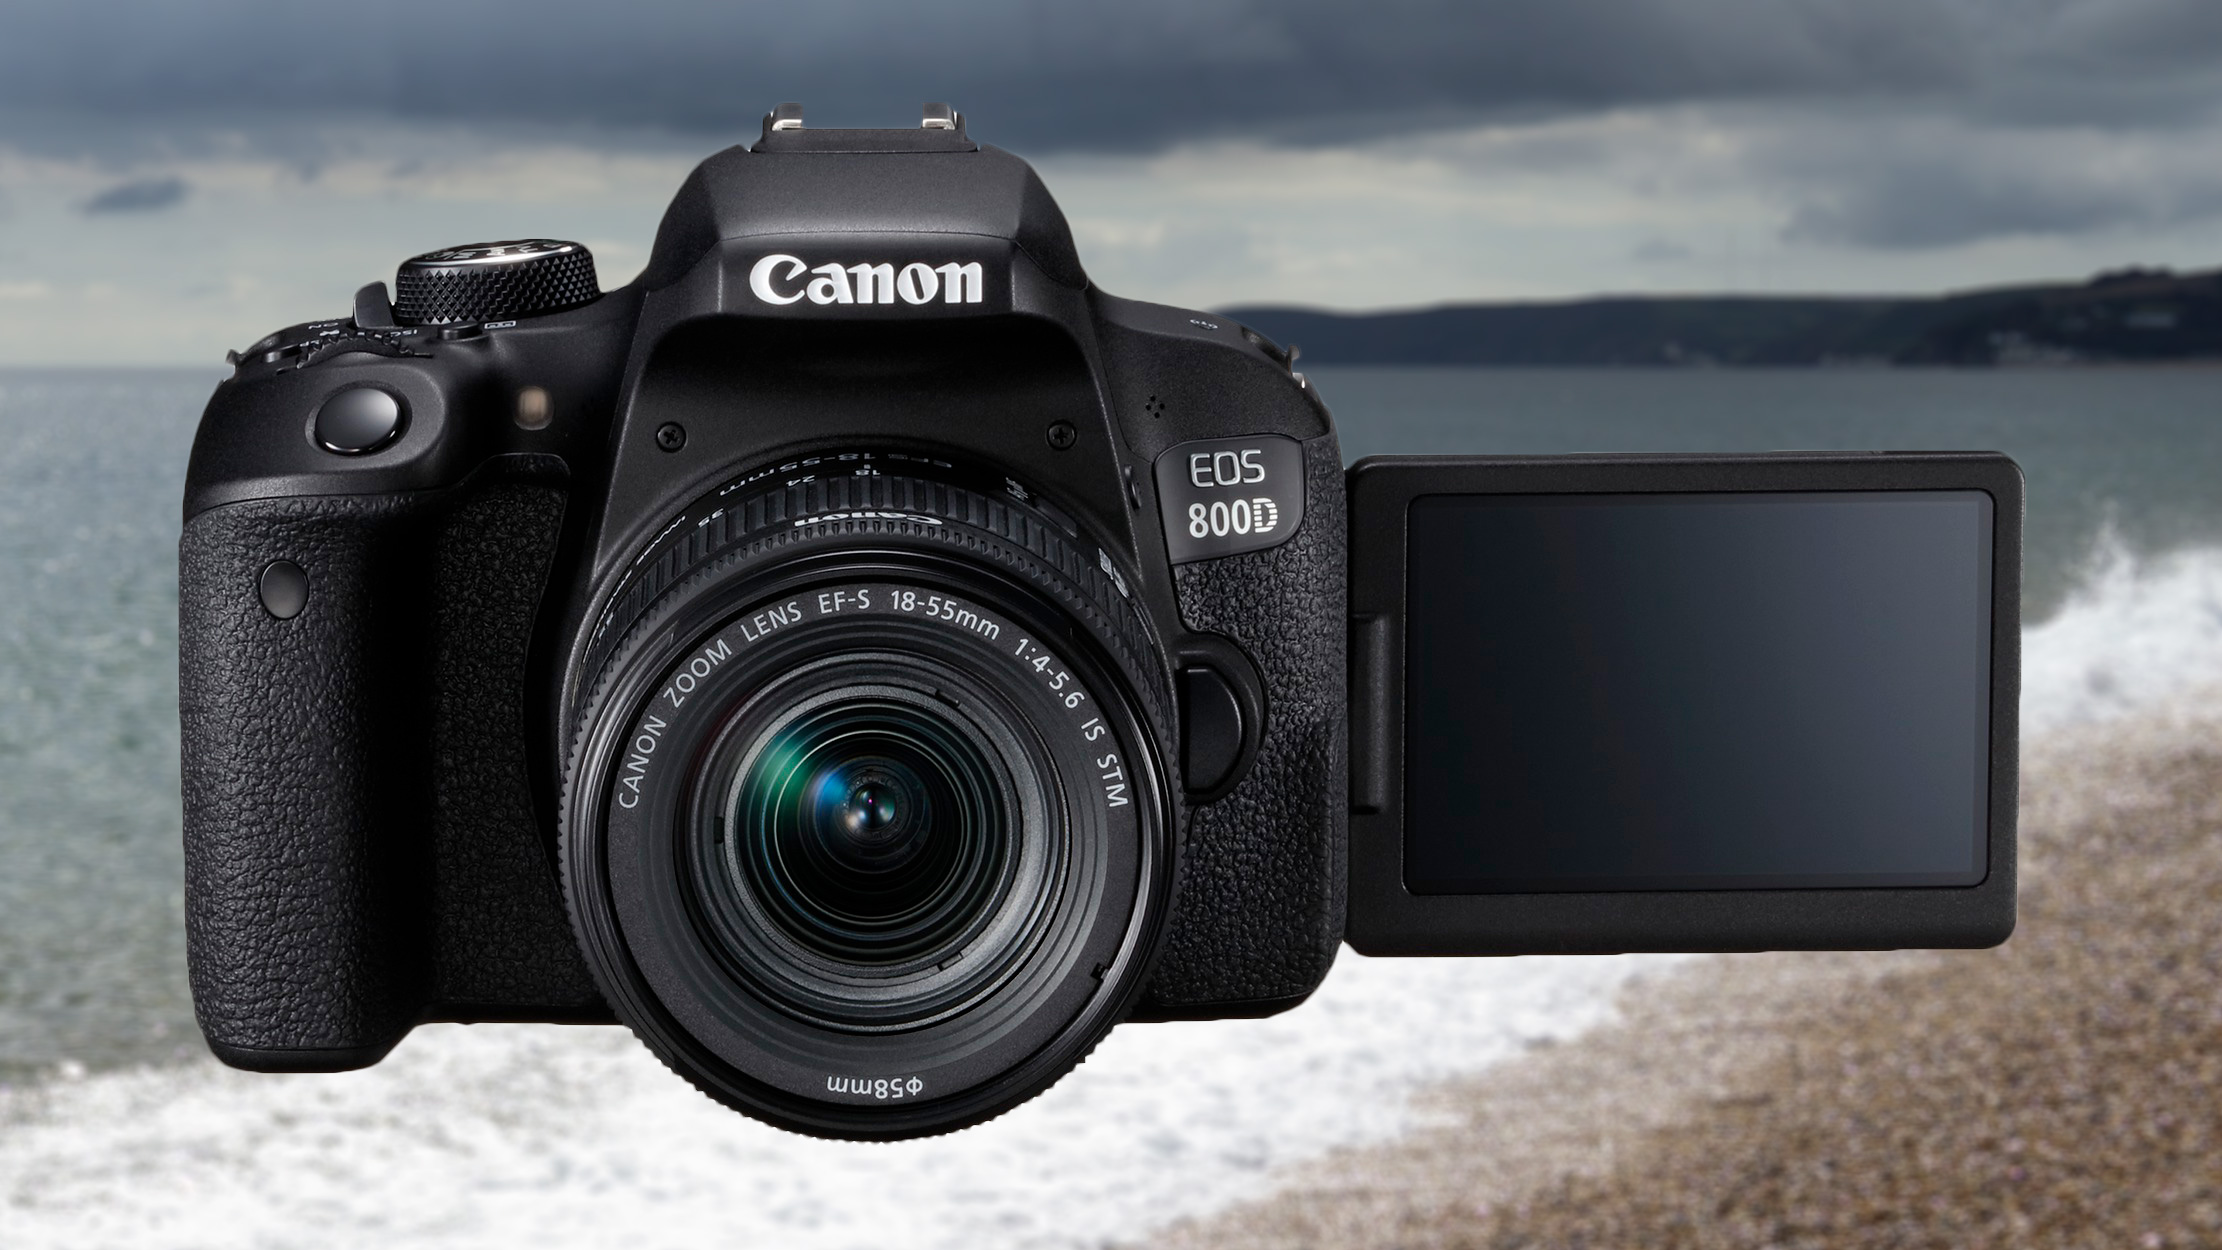 Transition sleep switch Canon EOS 800D/Rebel T7i review | Digital Camera World